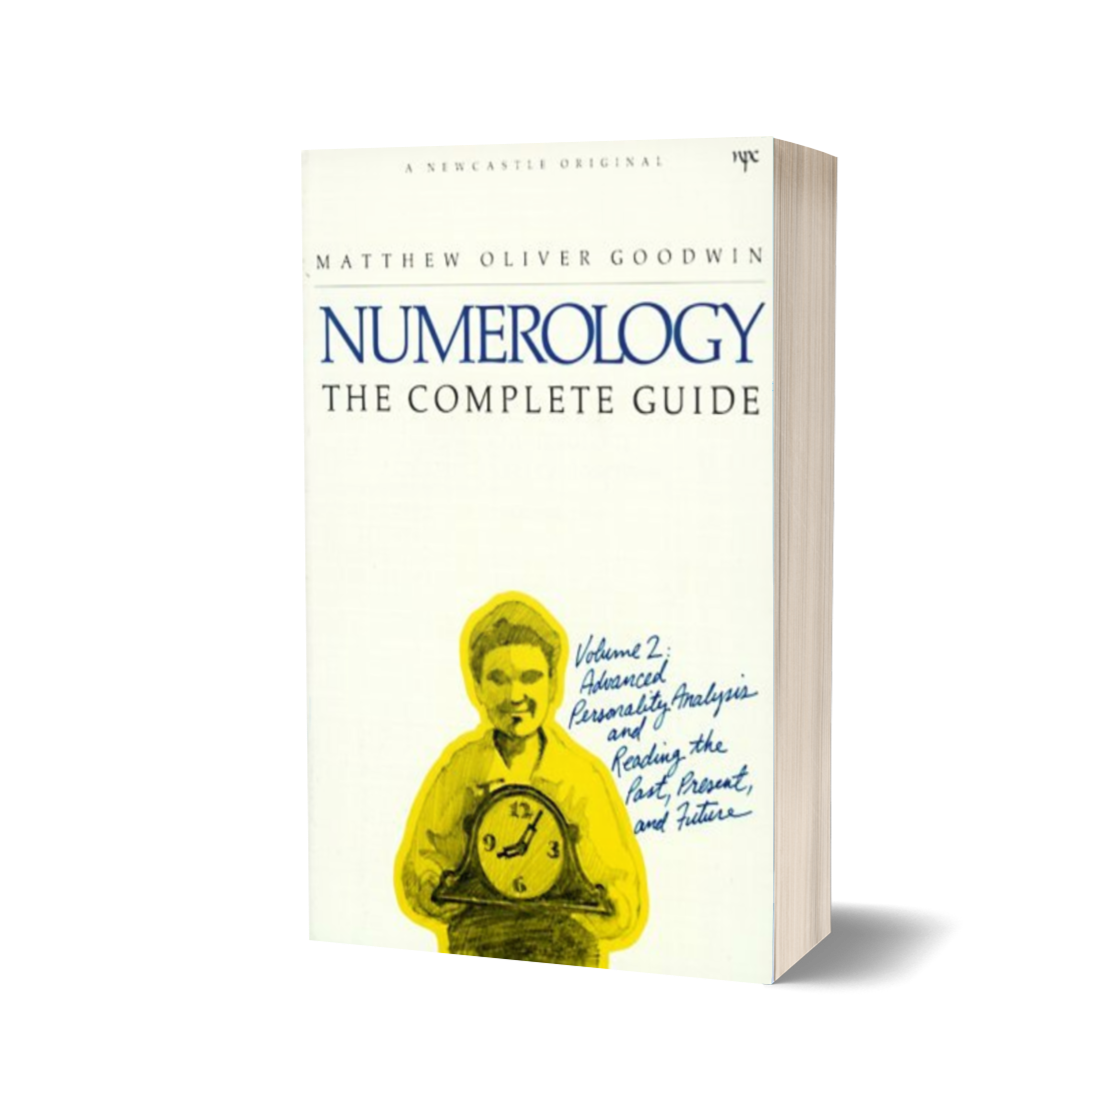 Numerology: The Complete Guide—Volume 2: Advanced Personality Reading